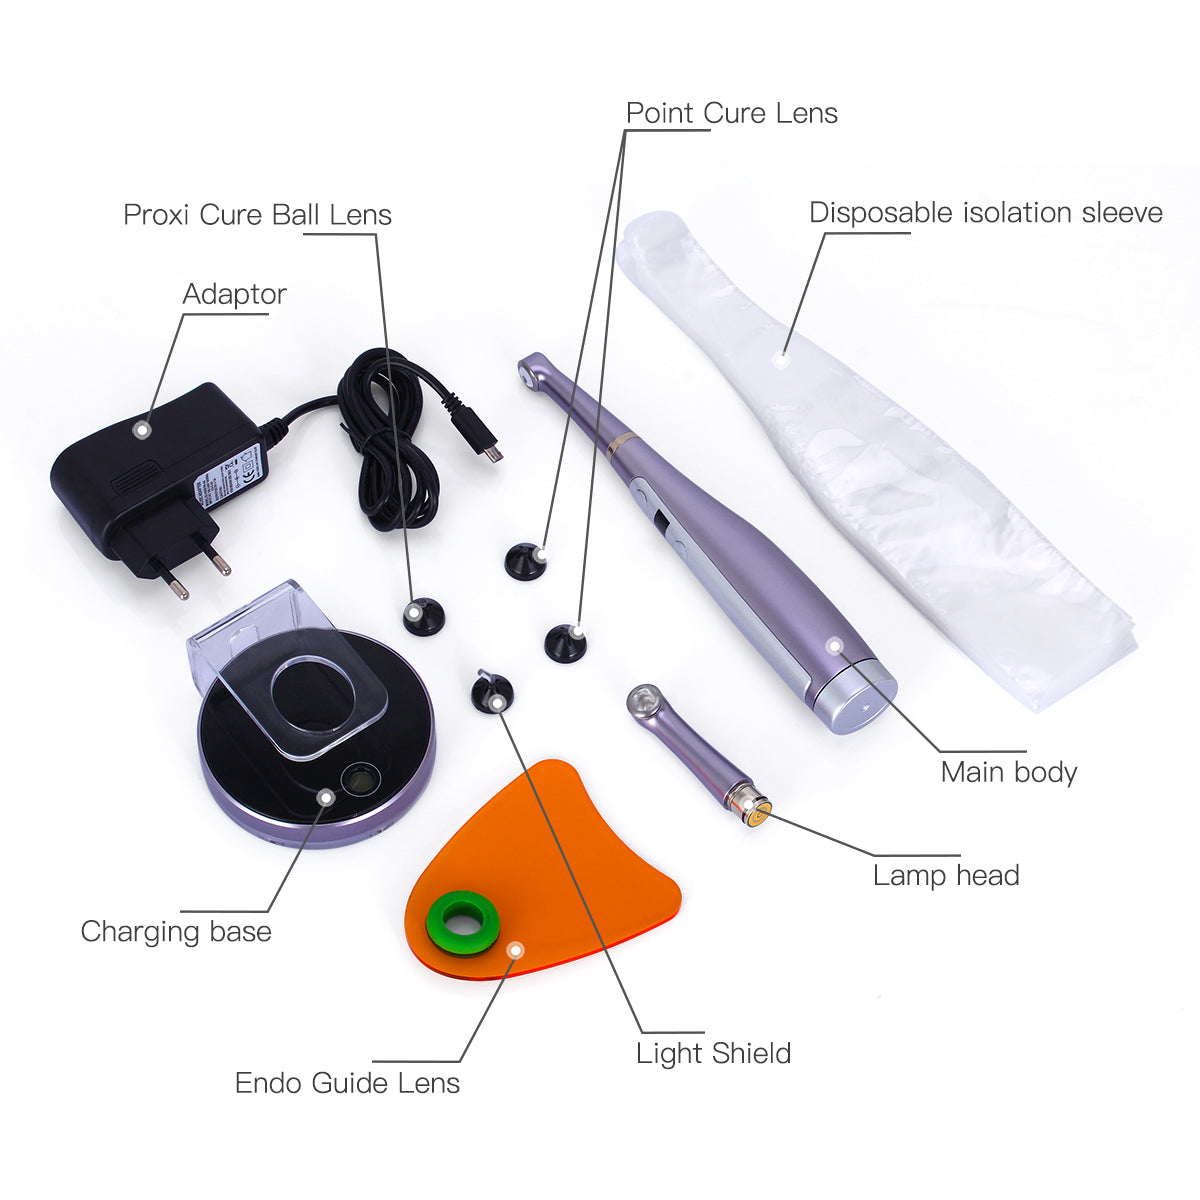 VAFU LED Curing Light Cordless OLED Screen 1 Second DeepCure Wide Specturm Metal Body With Caries Detector Light Meter 3200mW/Cm² - pairaydental.com